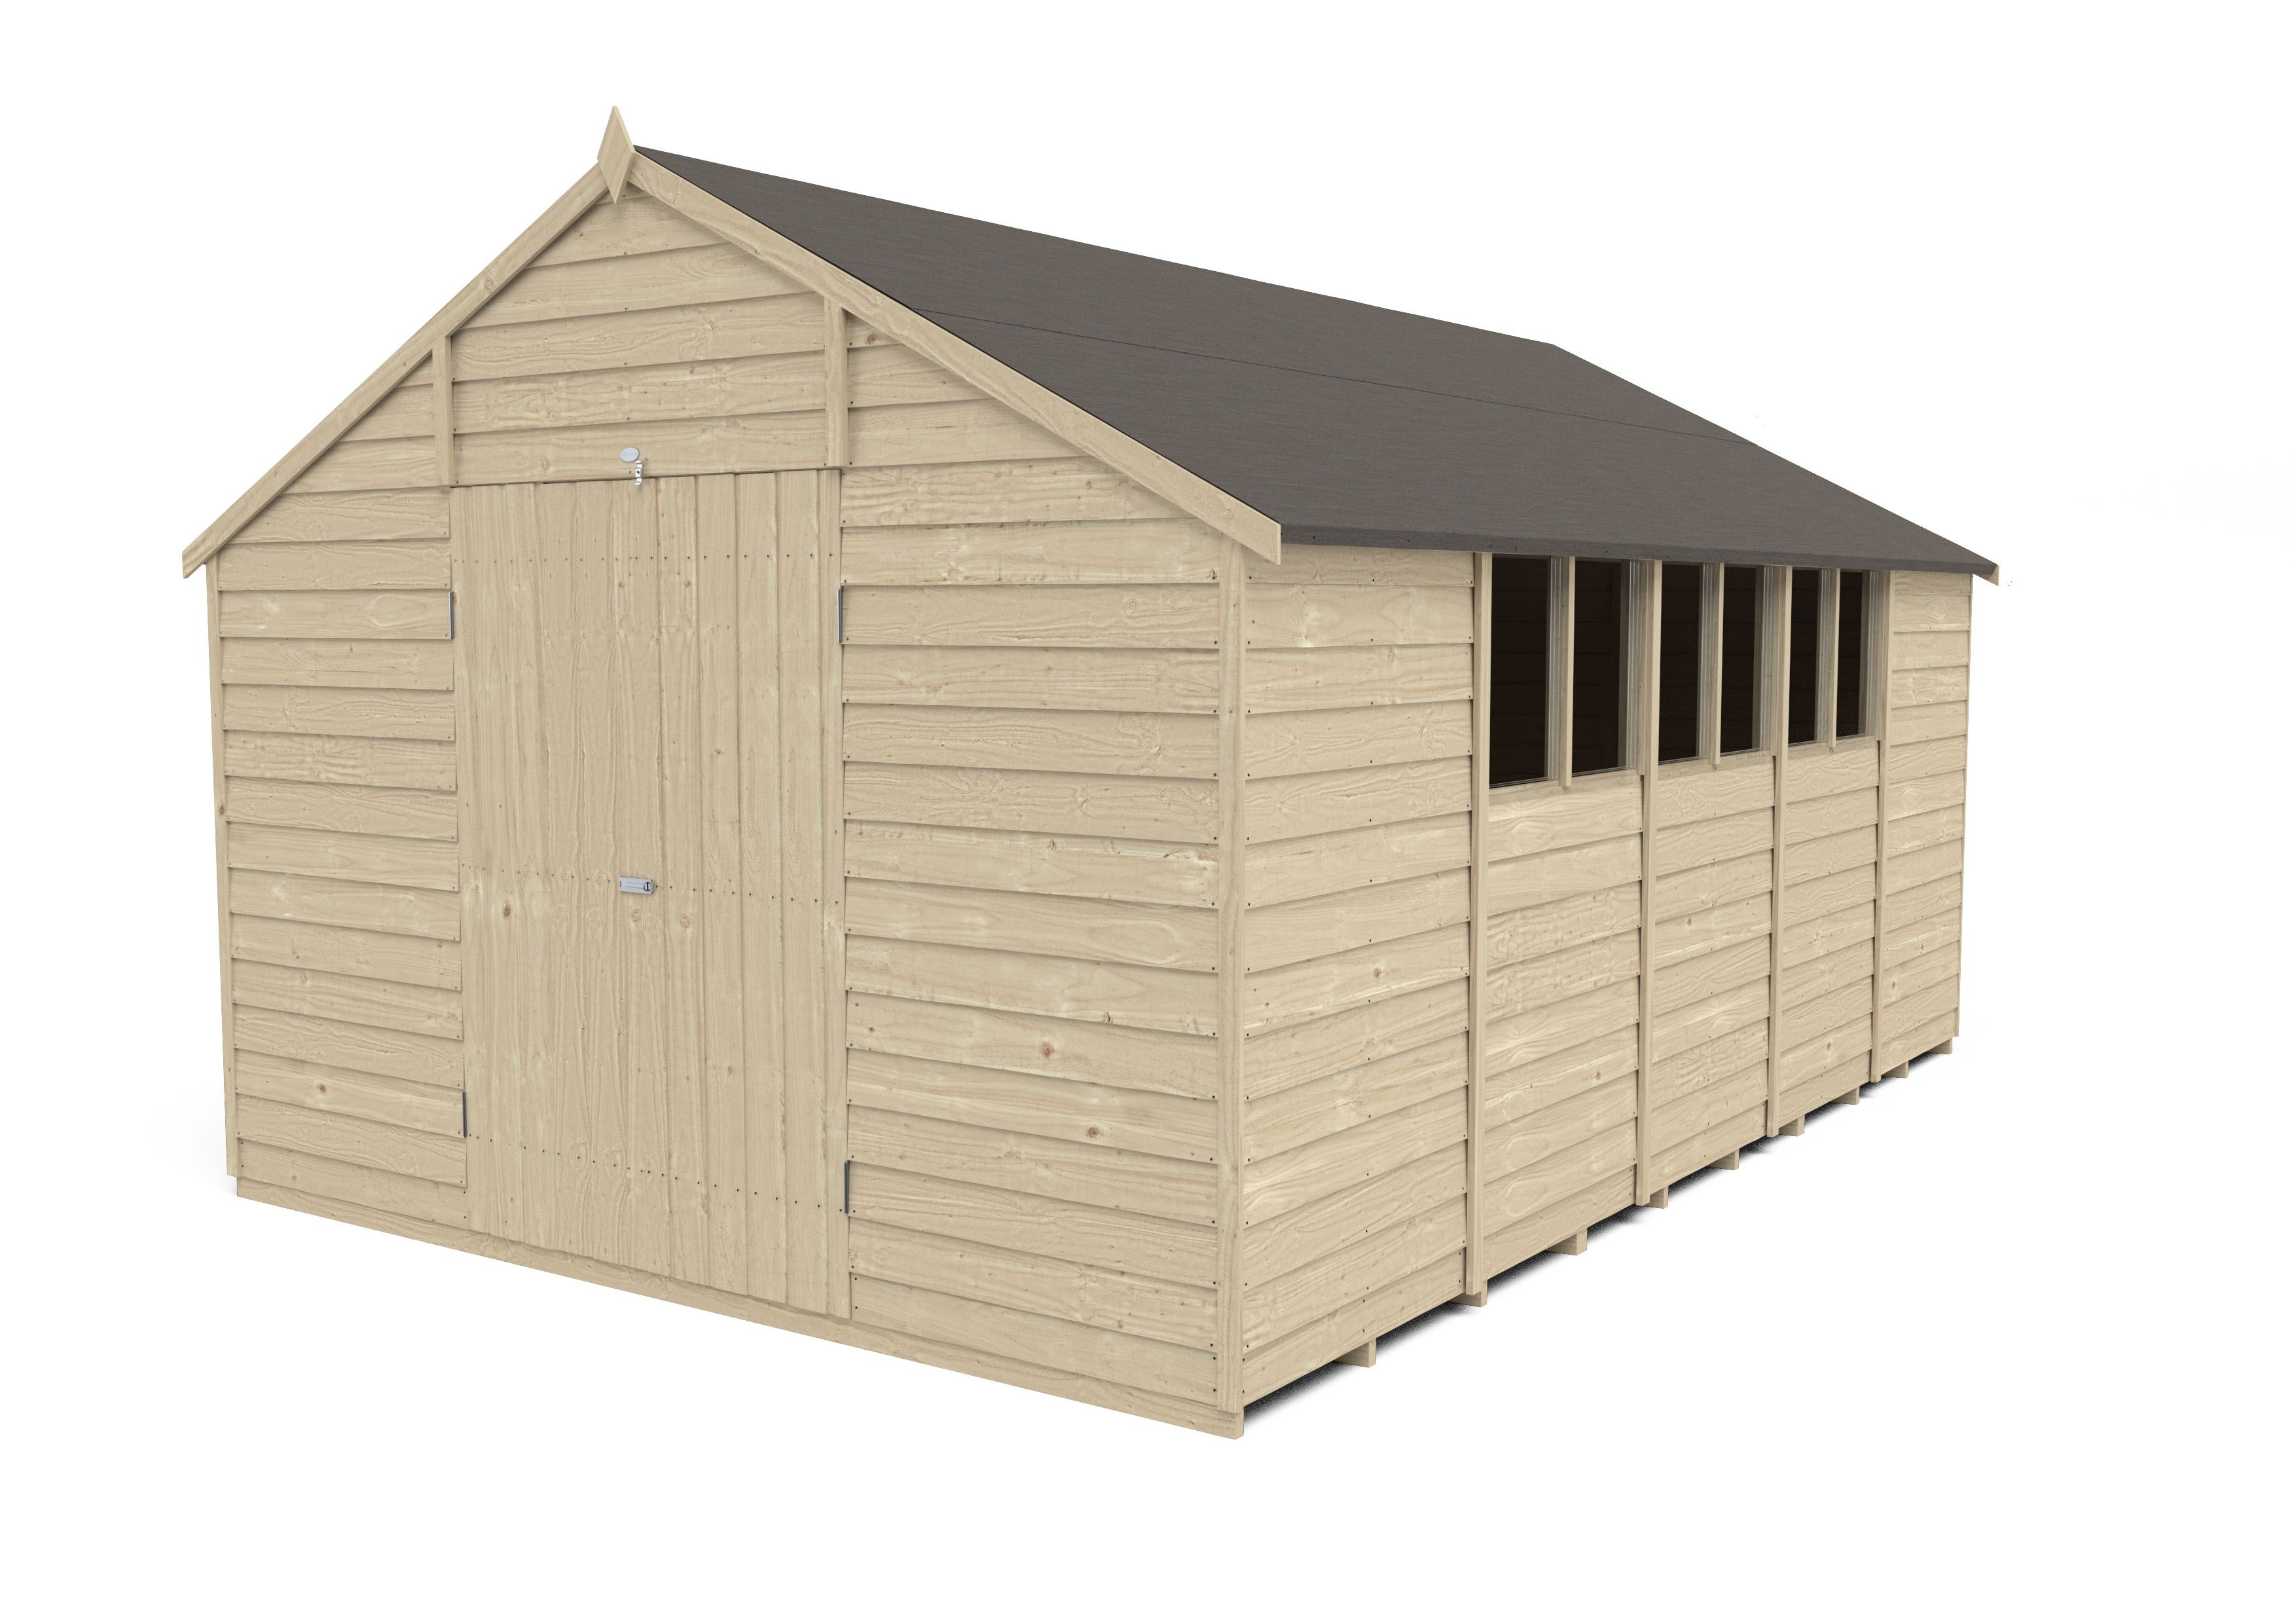 Forest Garden Overlap 10x15 ft Apex Wooden 2 door Shed with floor & 6 windows - Assembly service included